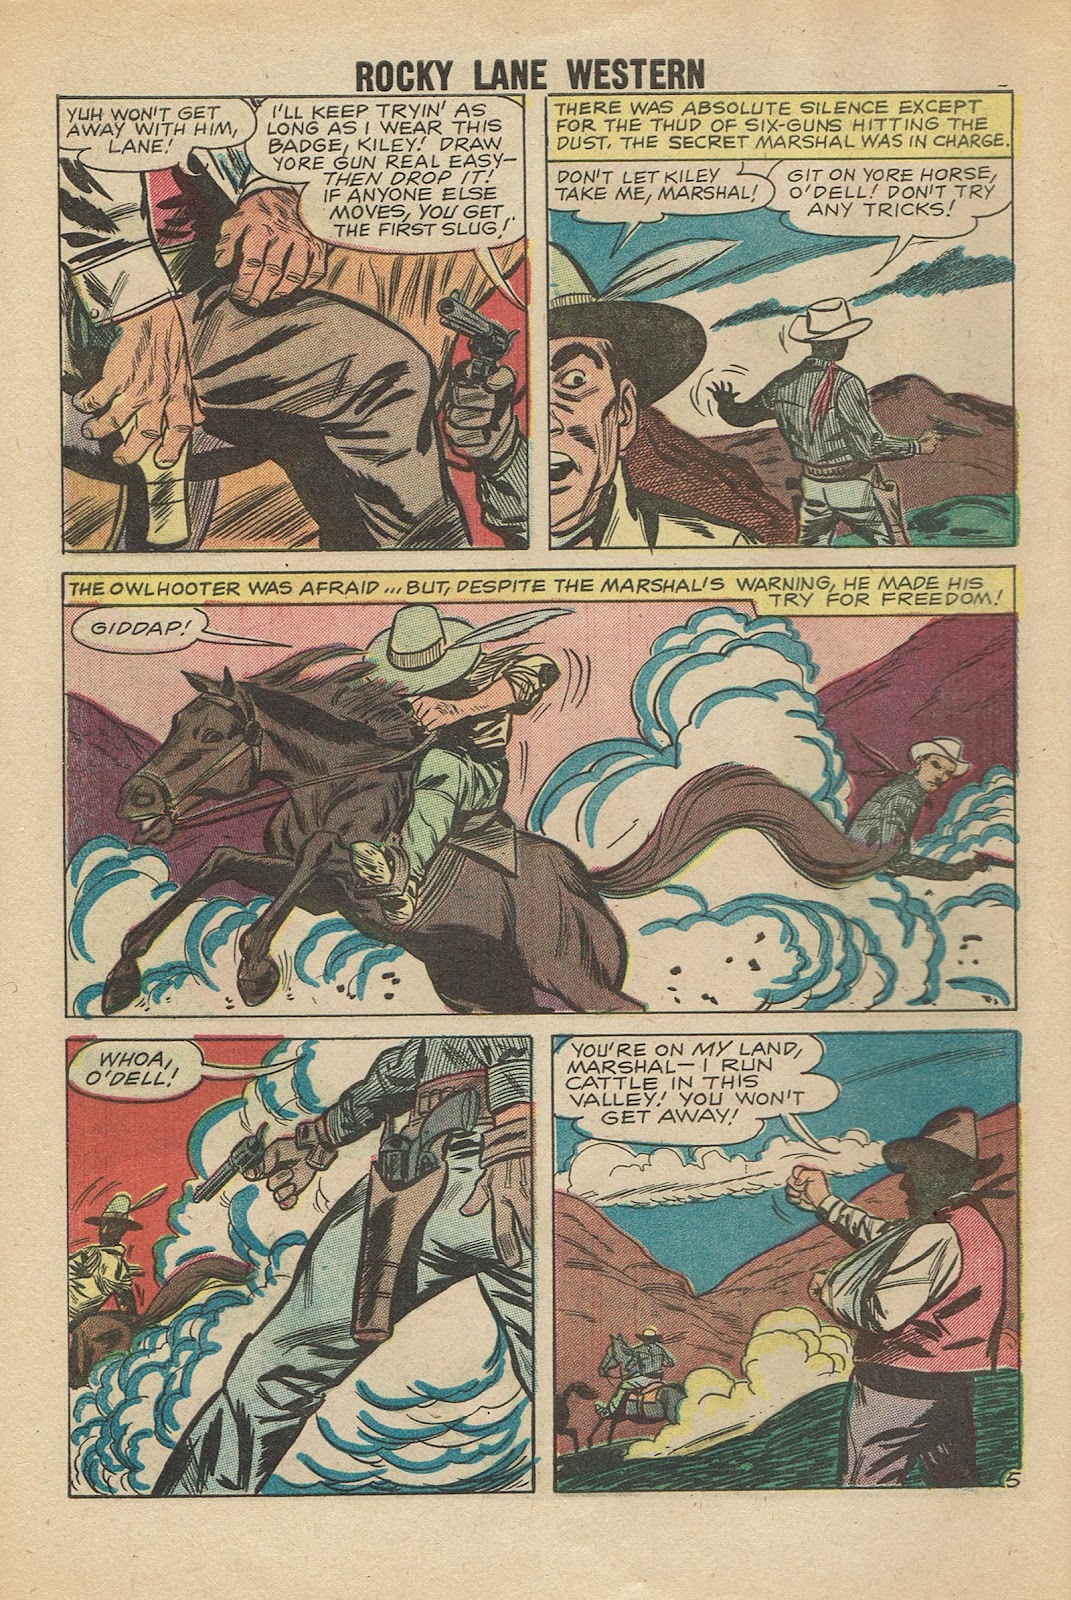 Rocky Lane Western (1954) issue 85 - Page 8